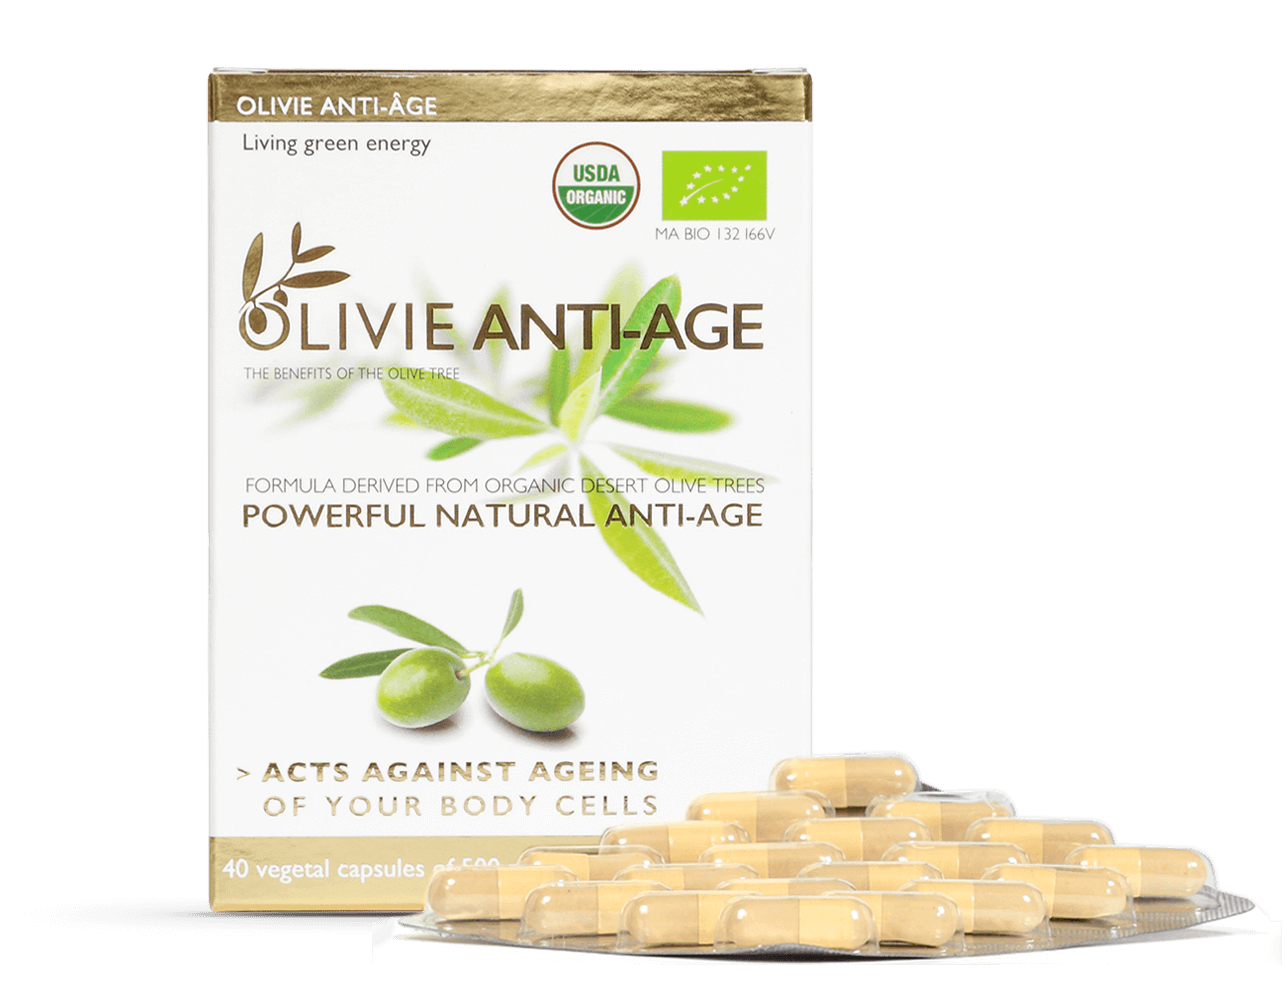 OLIVIE ANTI-AGE is organic and promotes active rejuvenation of your body cells.